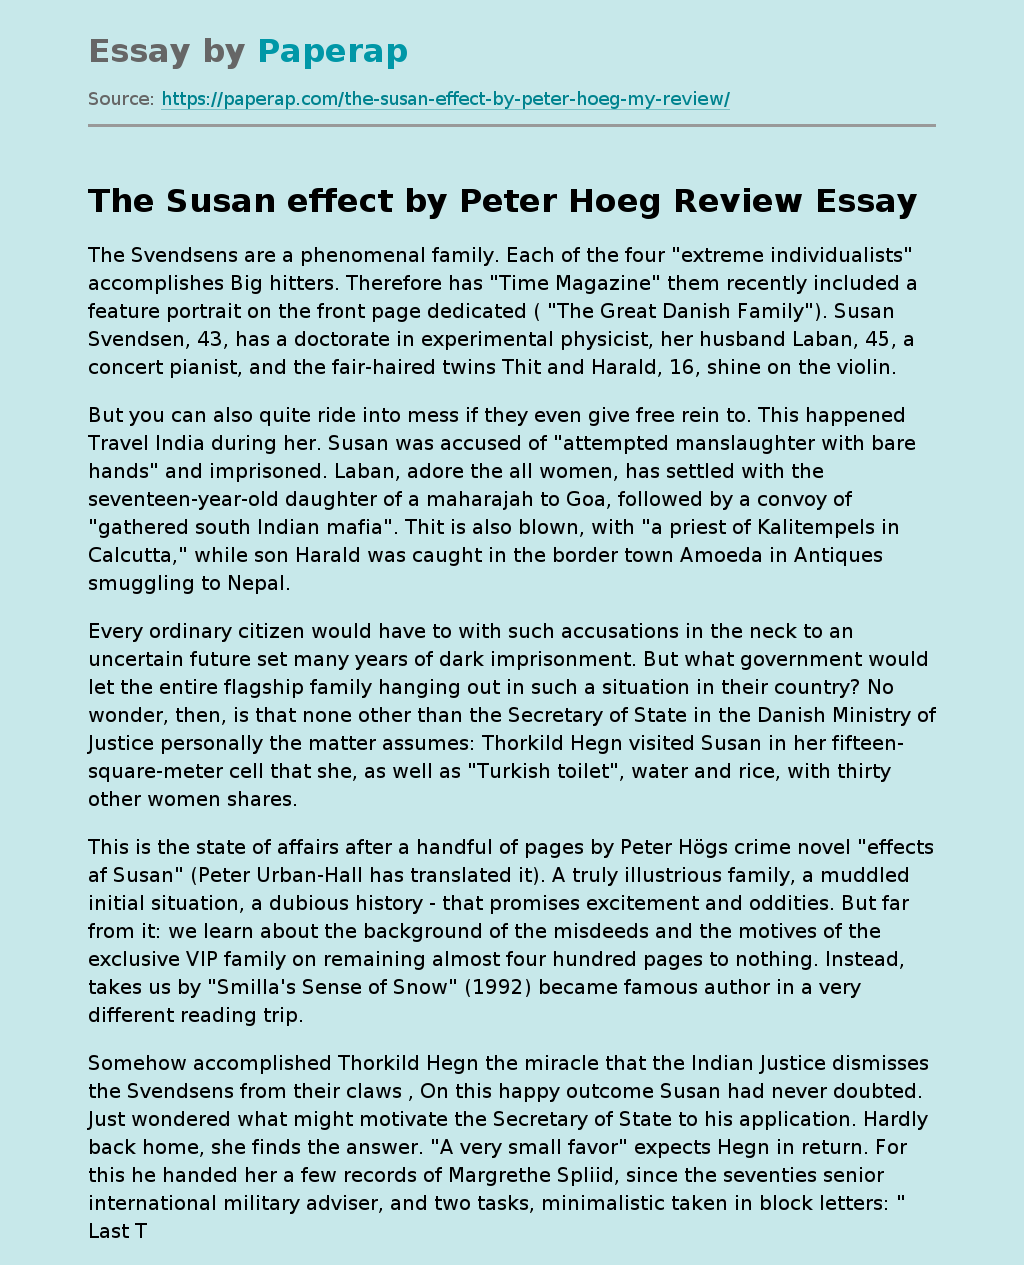 The Susan effect by Peter Hoeg Review